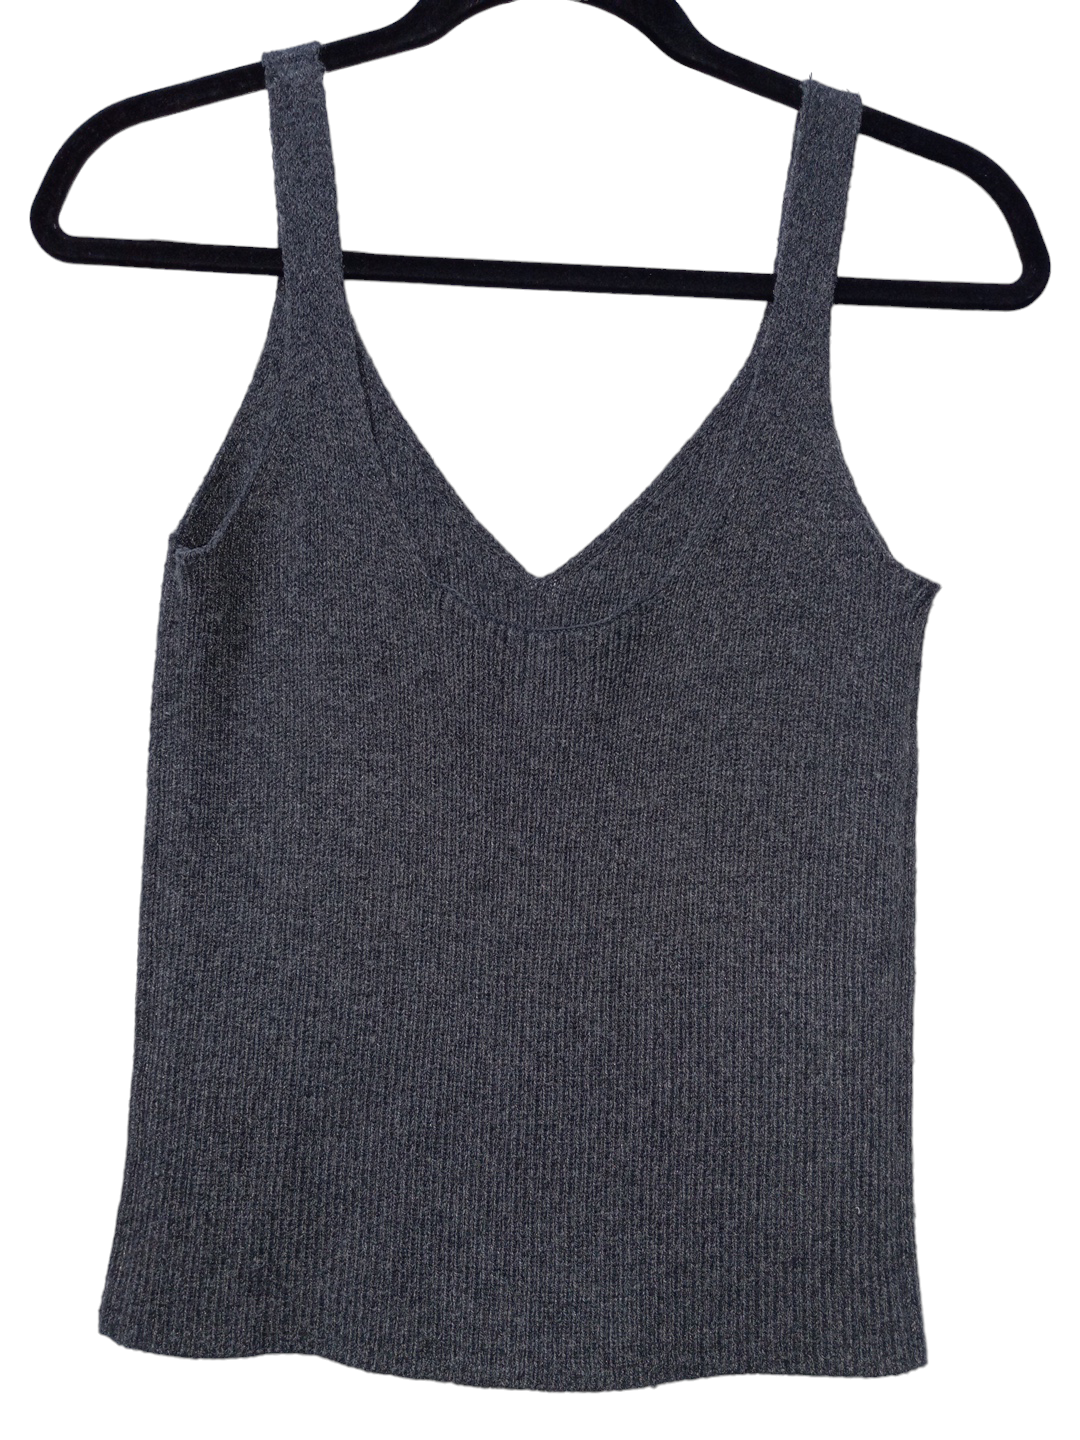 Grey Top Sleeveless Old Navy, Size S